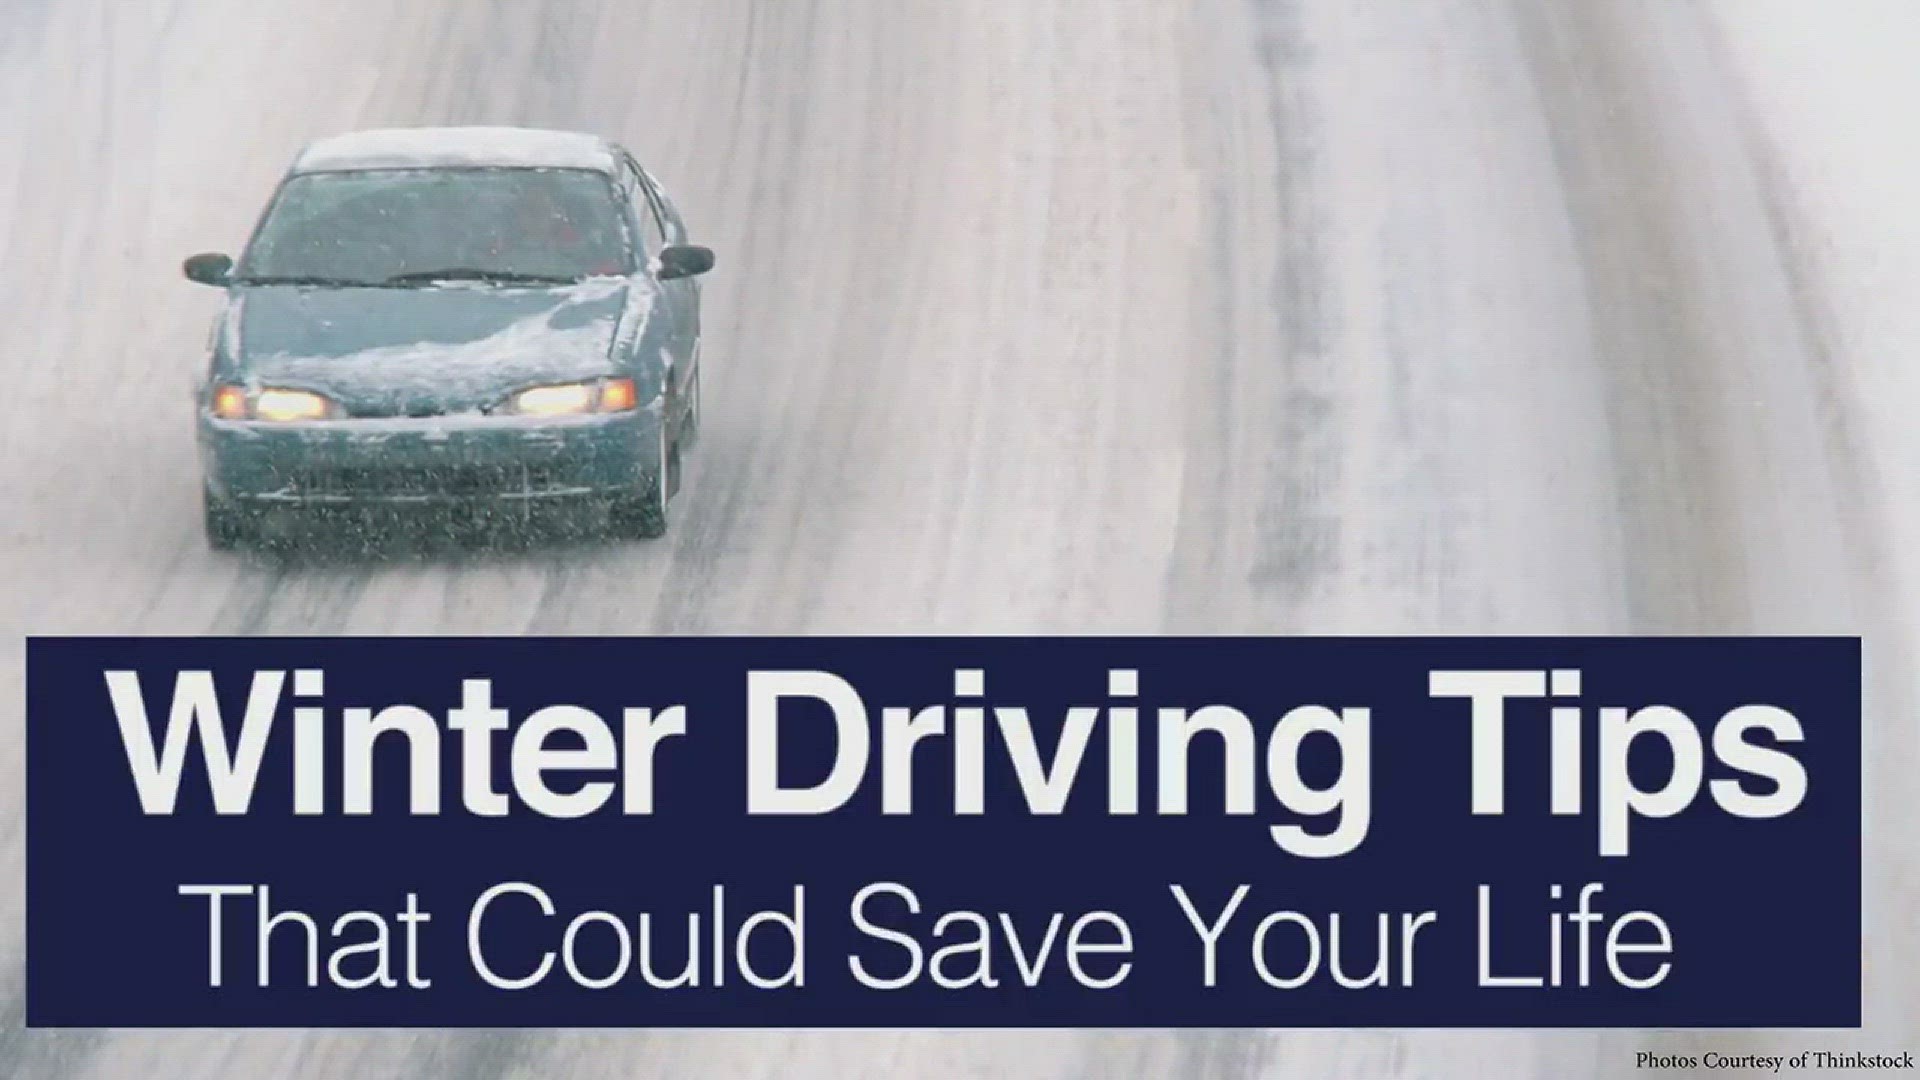 Brush up on your winter driving skills with these tips